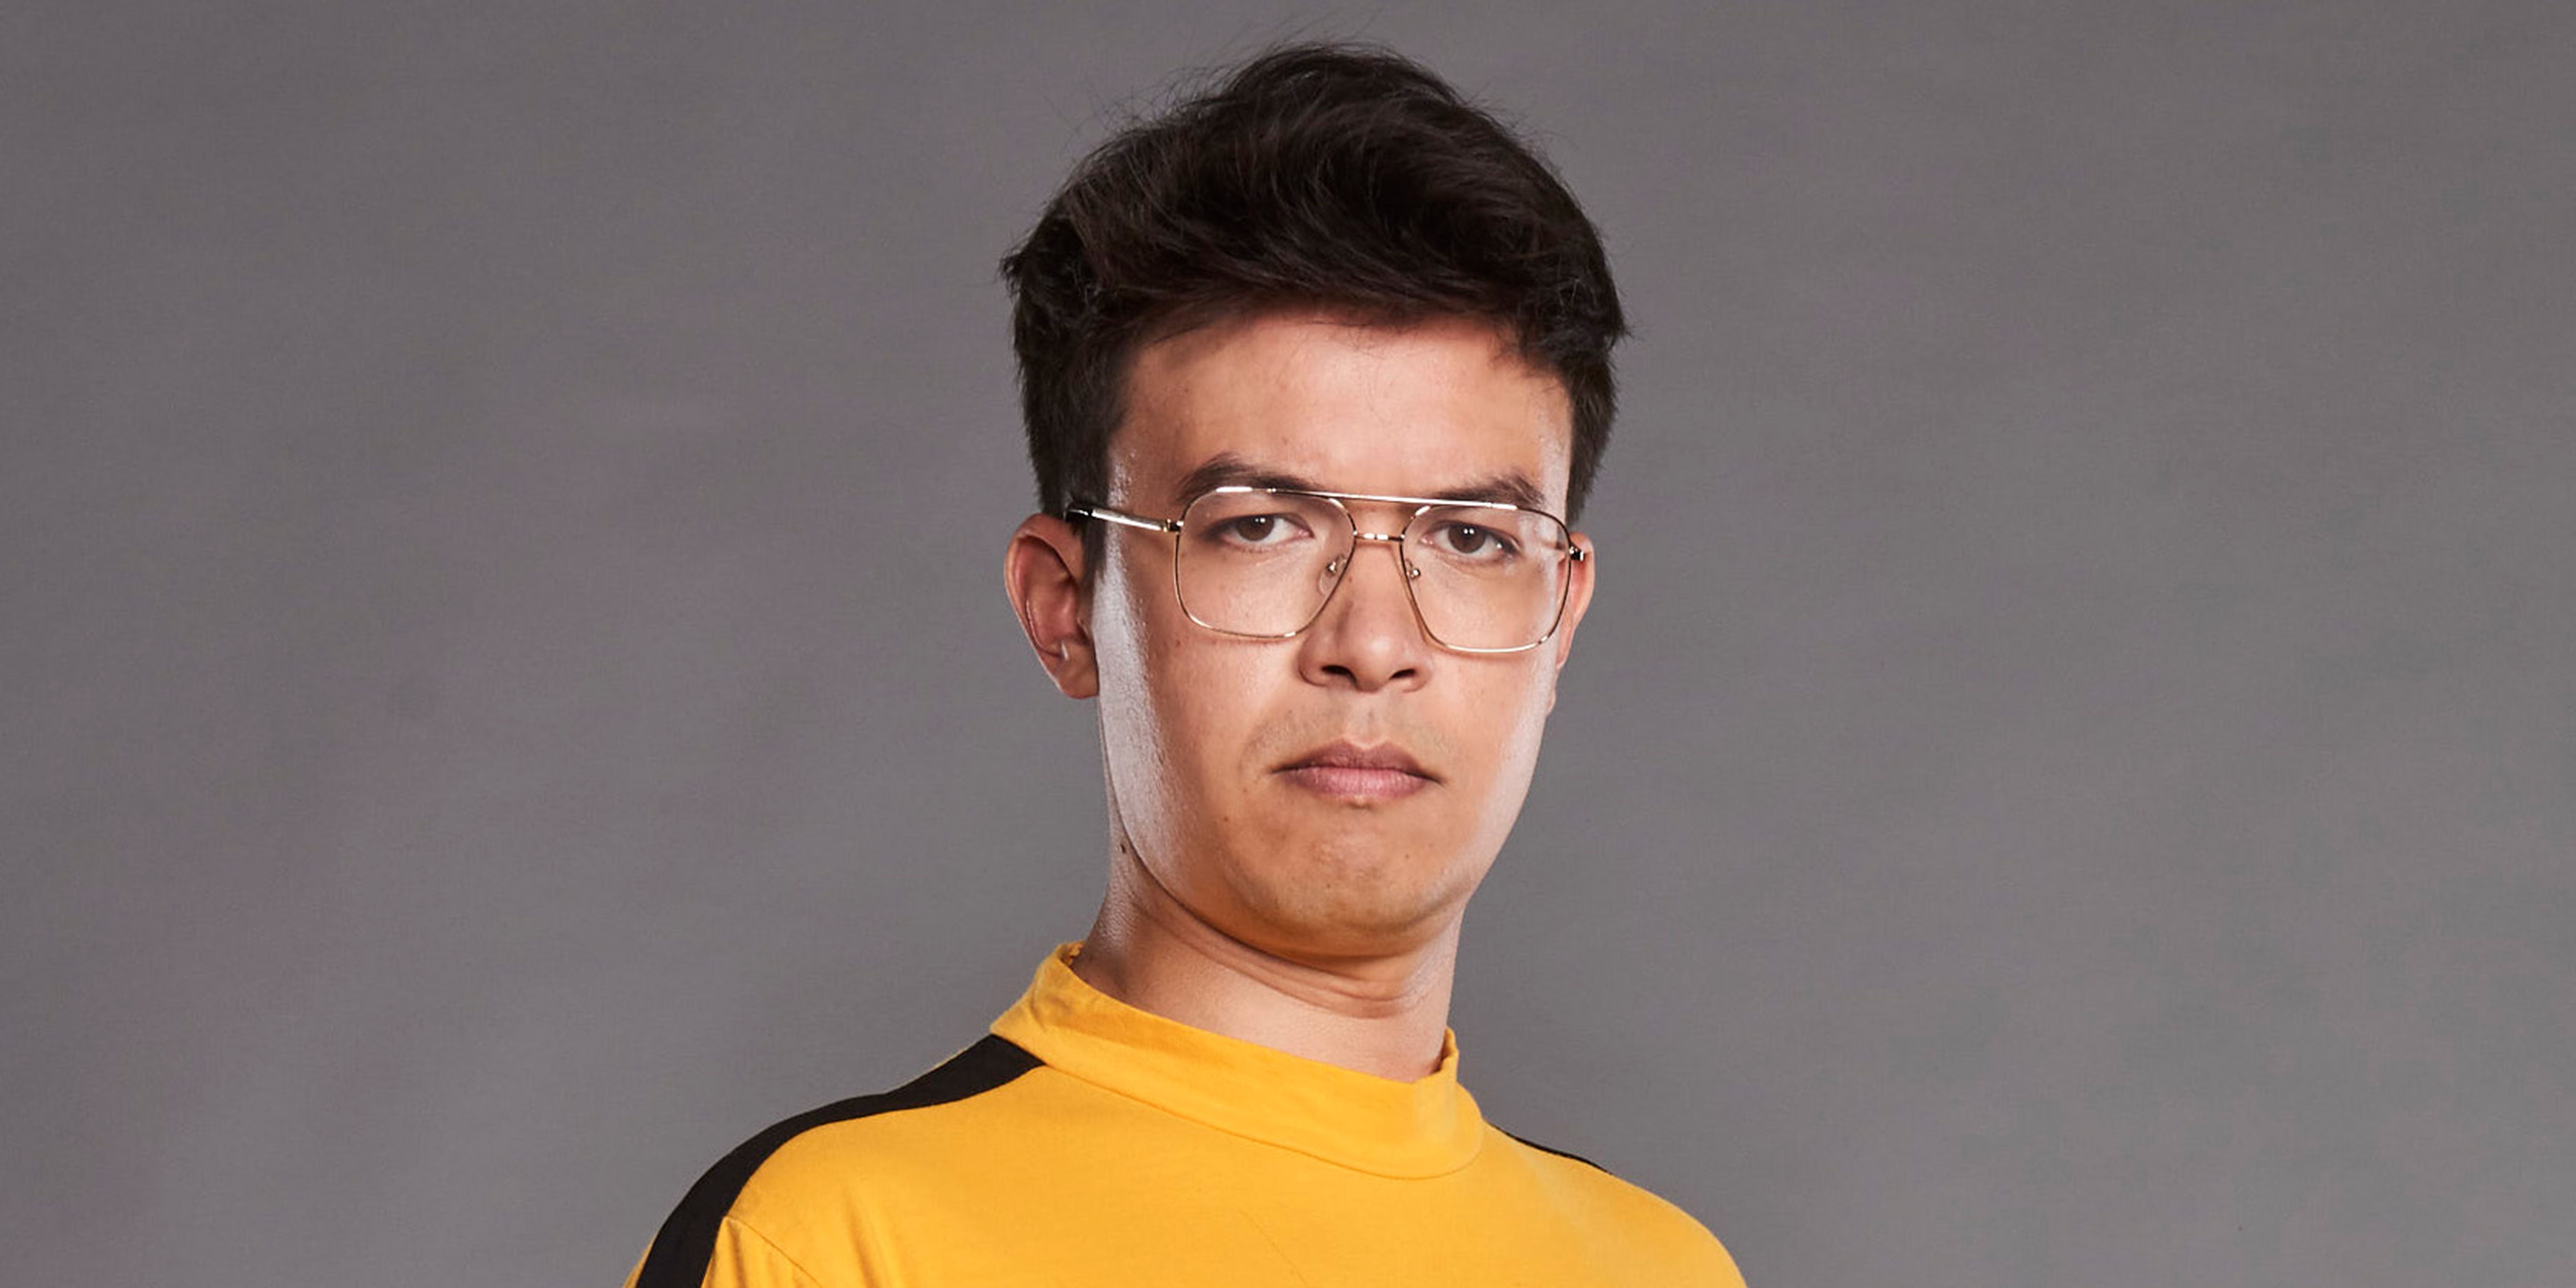 PHIL WANG SELLS OUT ENTIRE RUN AHEAD OF EDINBURGH FESTIVAL FRINGE OPENING - NEW STAND-UP SHOW PHILLY PHILLY WANG WANG